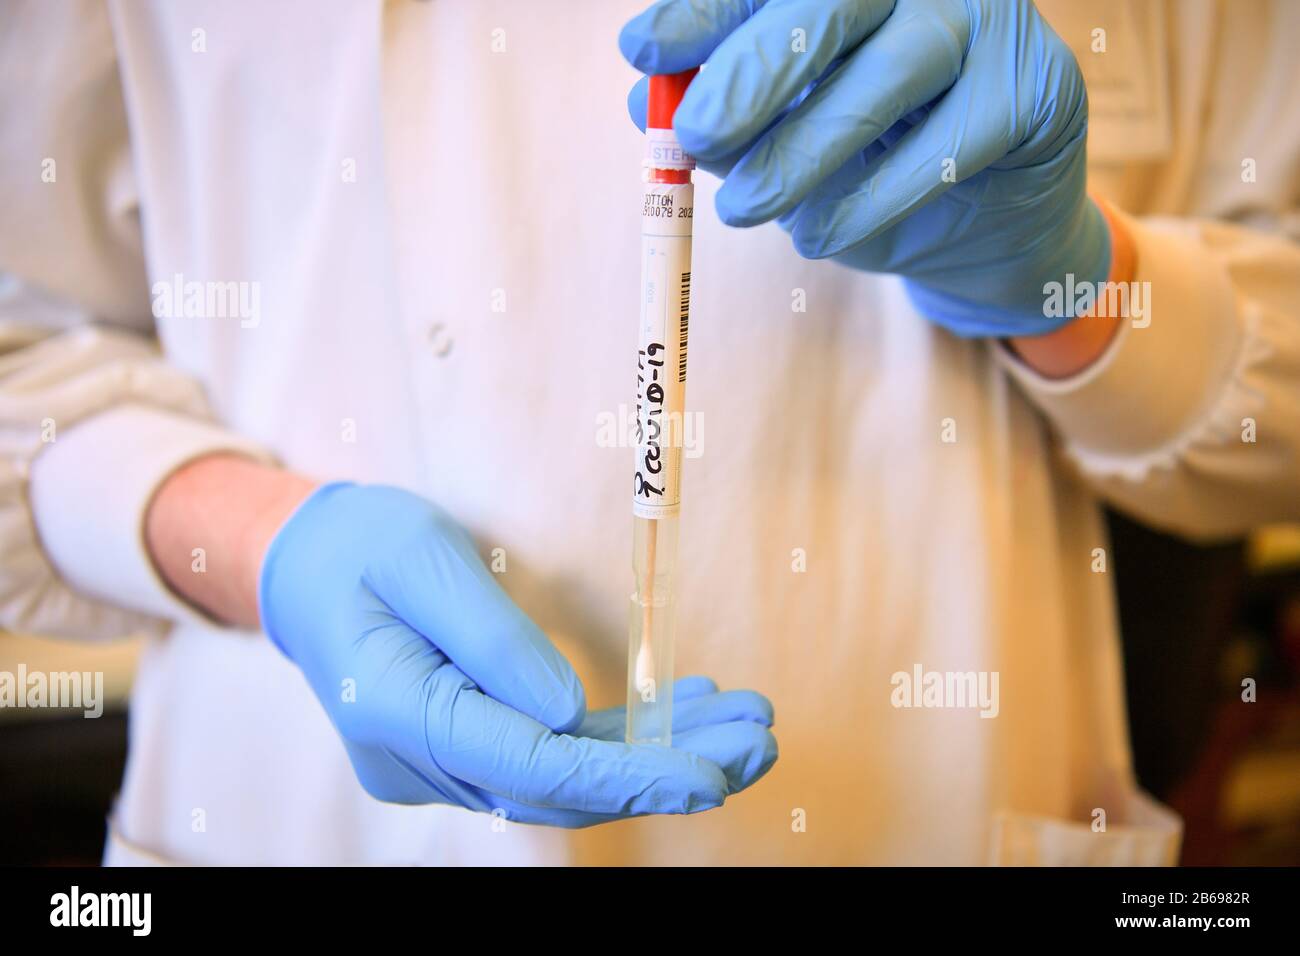 A dummy COVID-19 swab is handled inside a sealed sterile tube during a demonstration by lab technicians who are carrying out diagnostic tests for coronavirus in the microbiology laboratory inside the Specialist Virology Centre at the University Hospital of Wales in Cardiff. Stock Photo